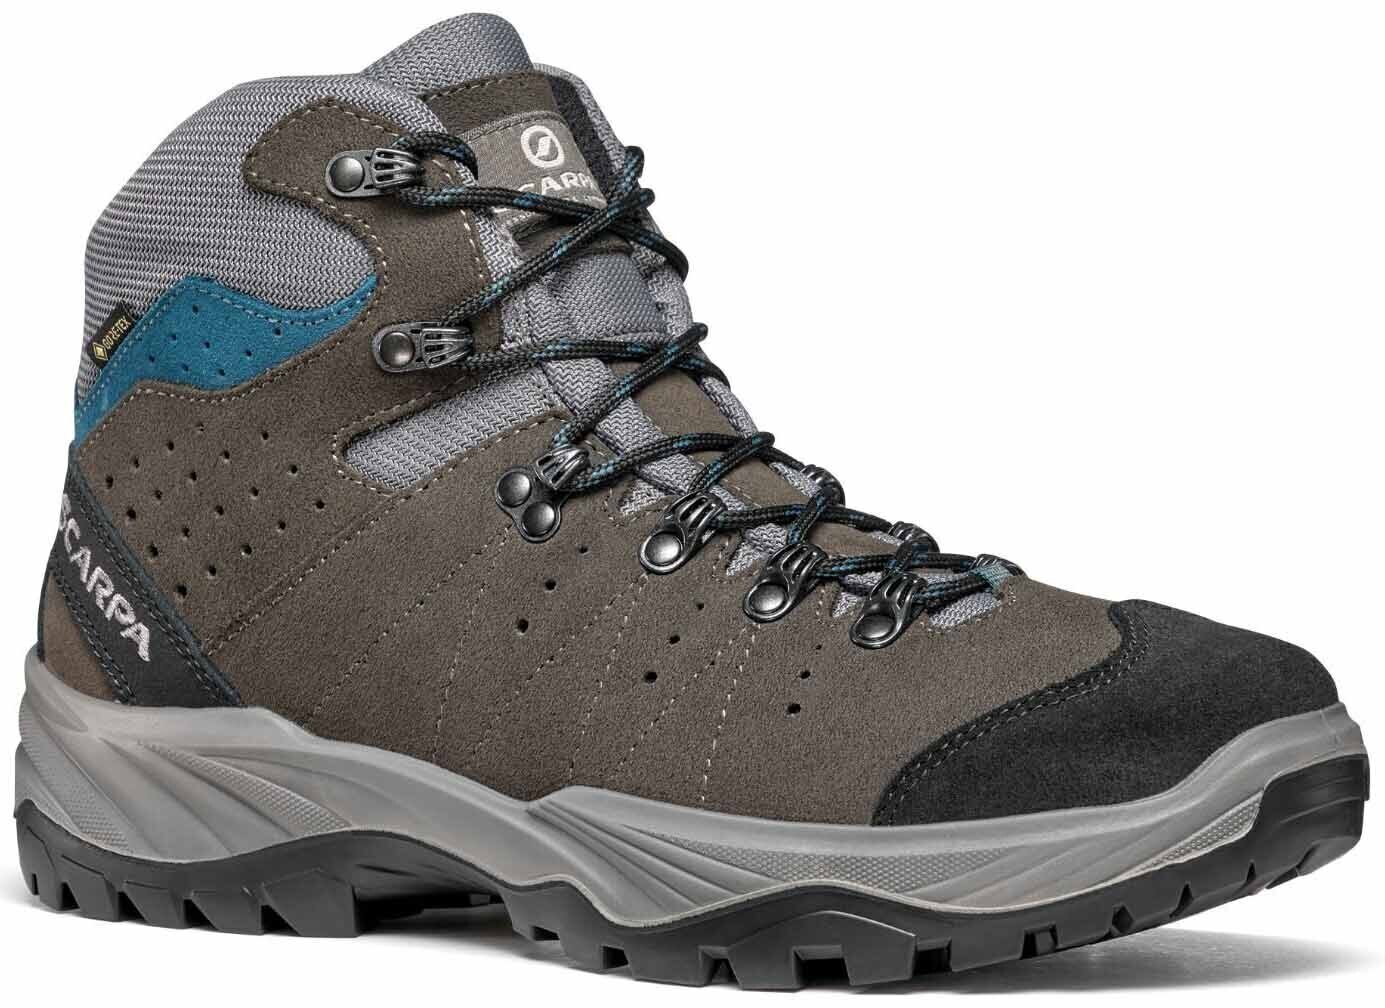 Chaussures outdoor hommes Scarpa Mistral Gore Tex Smoke/Lake Blue 45 Chaussures outdoor hommes